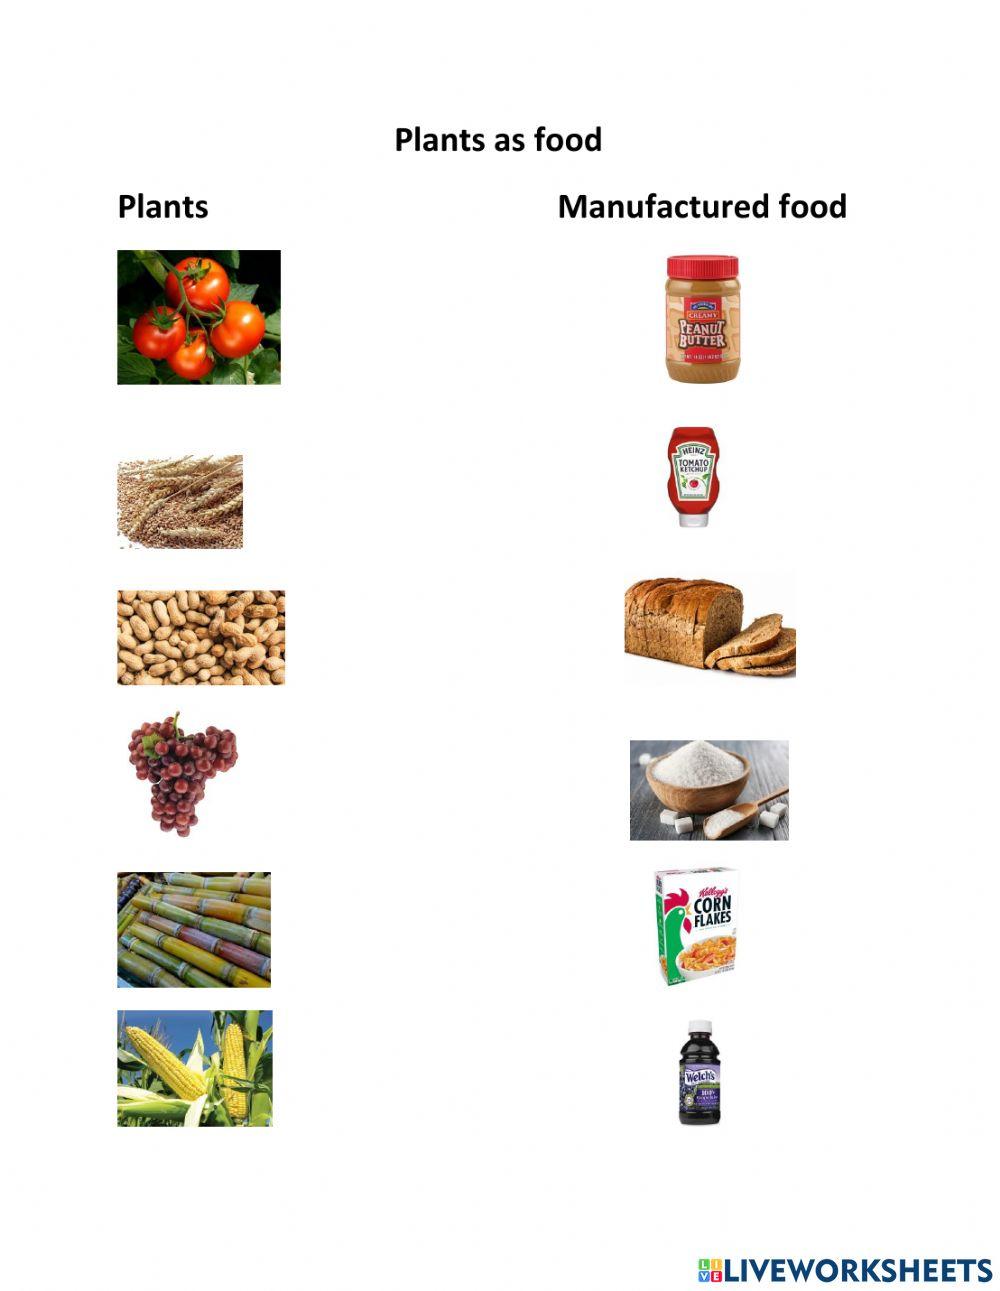 Manufactured foods